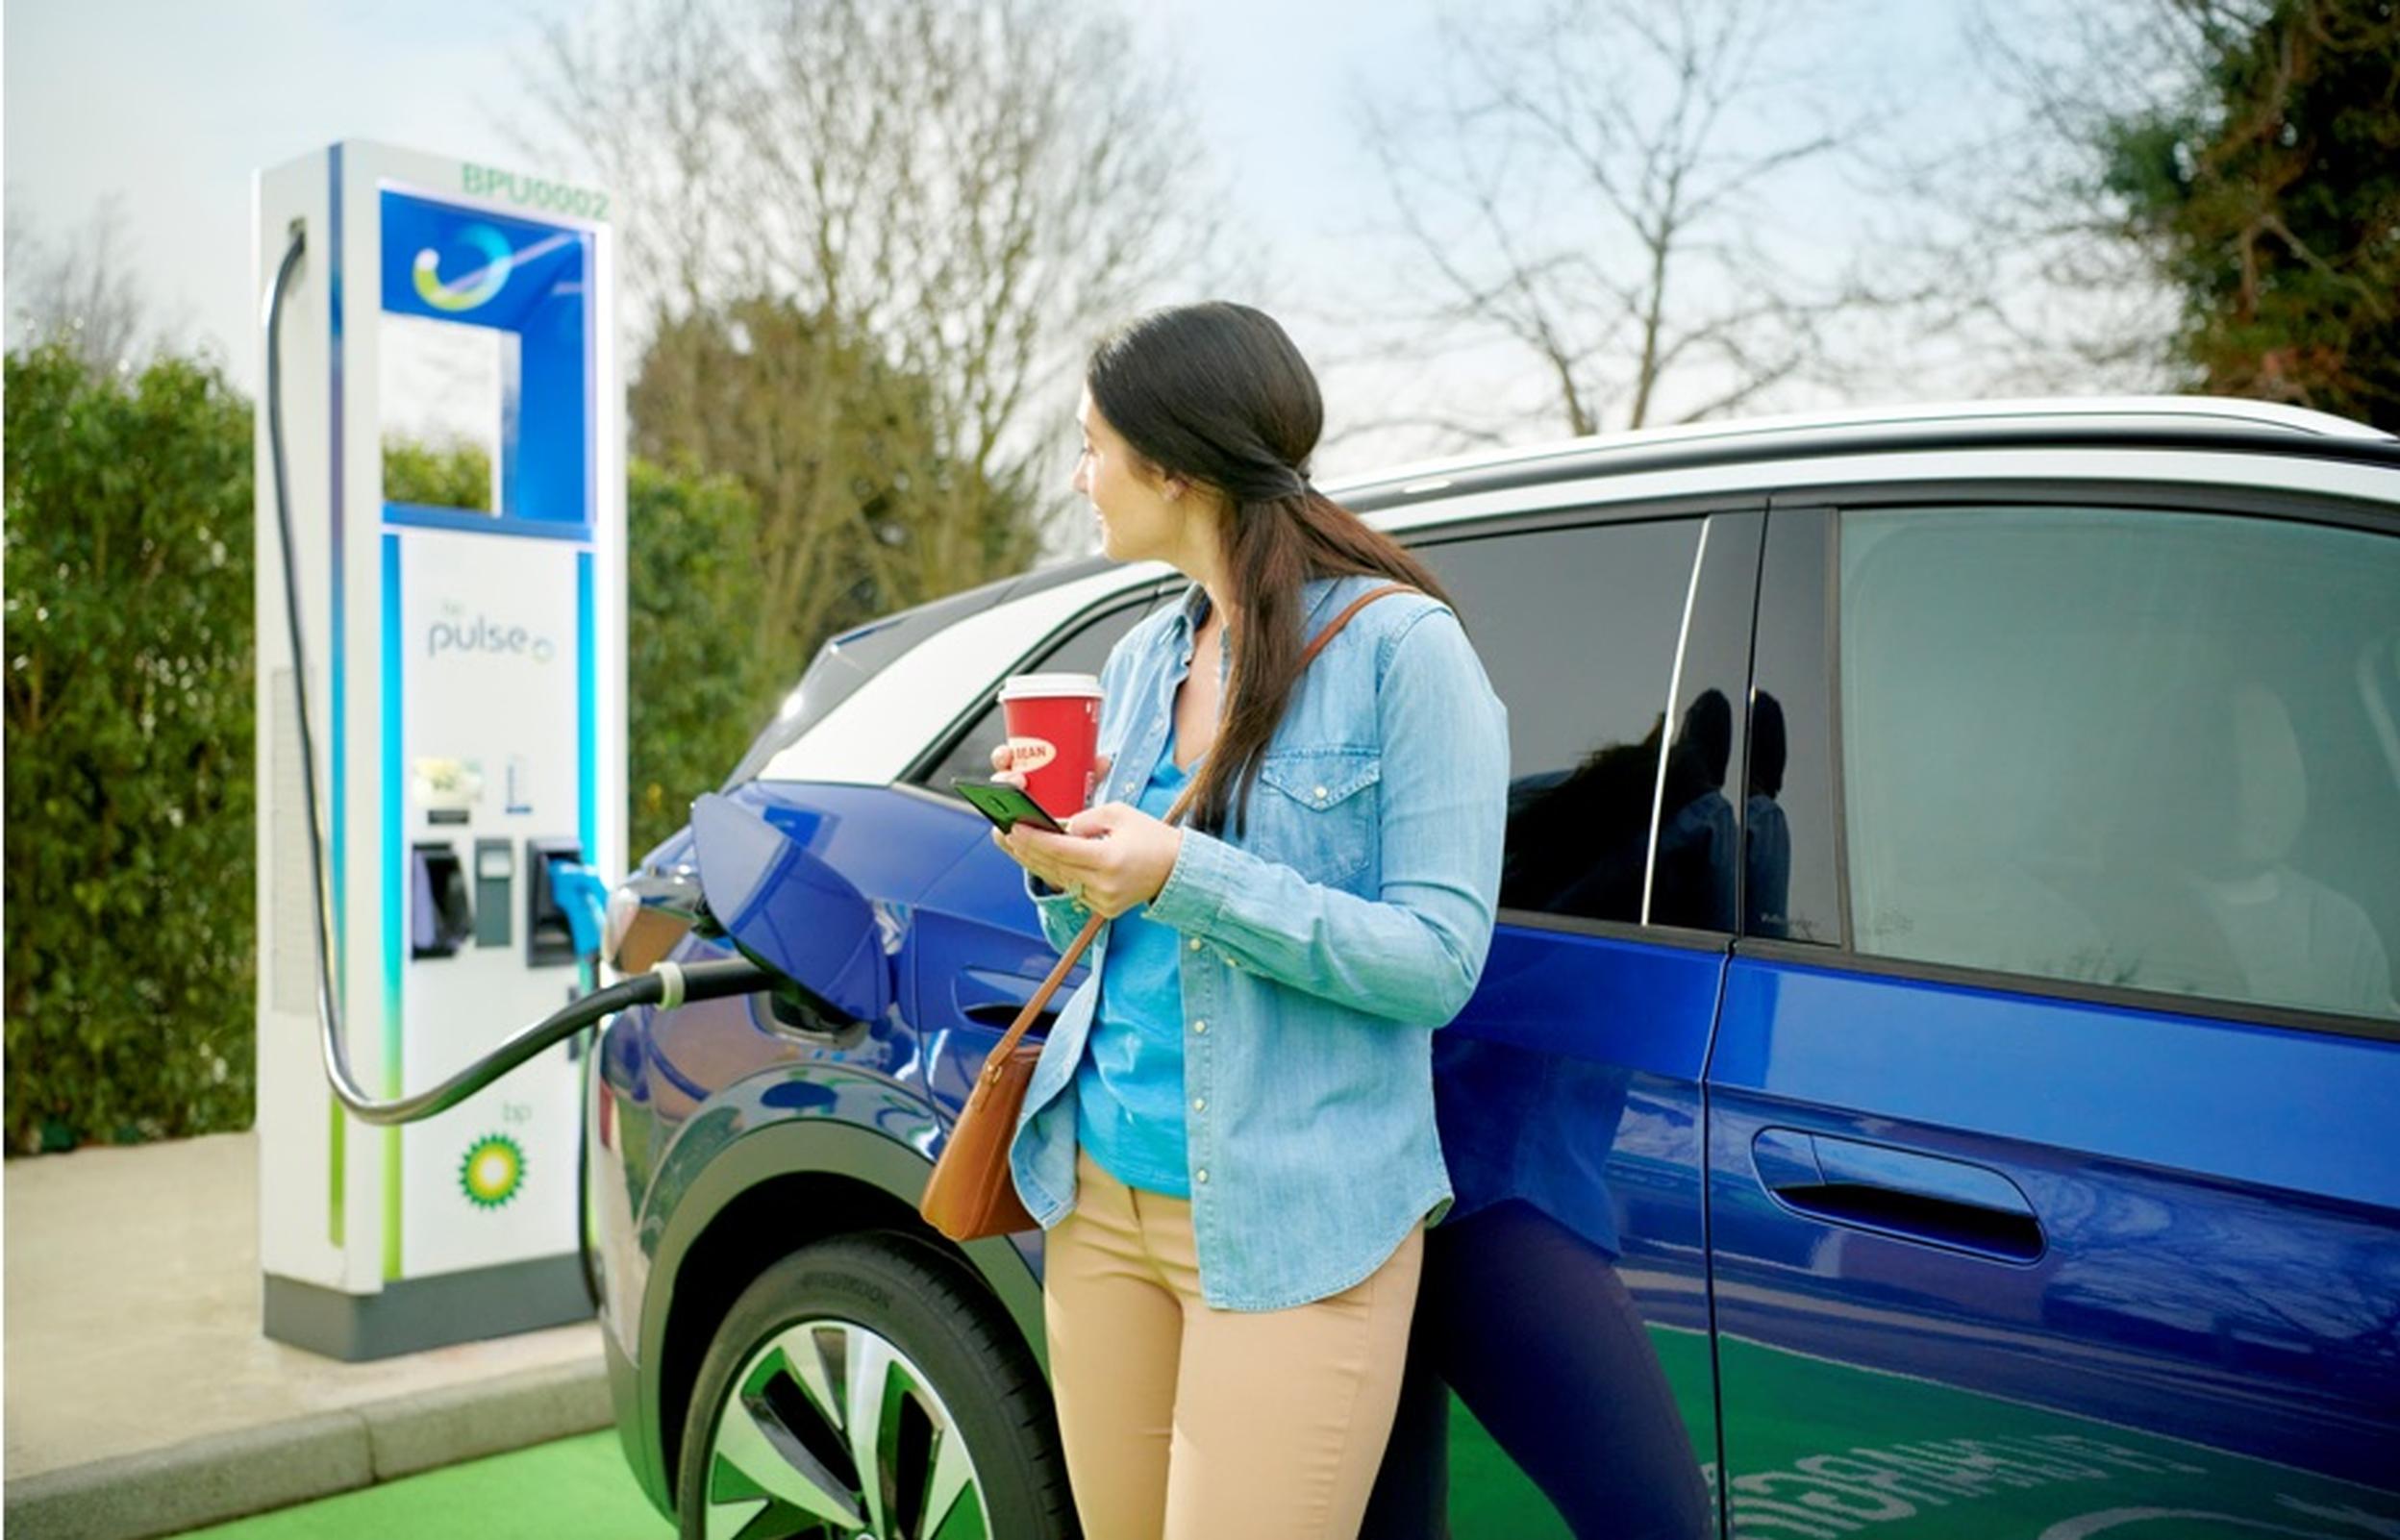 Company’s bp pulse network is set to approximately triple number of charging points by 2030